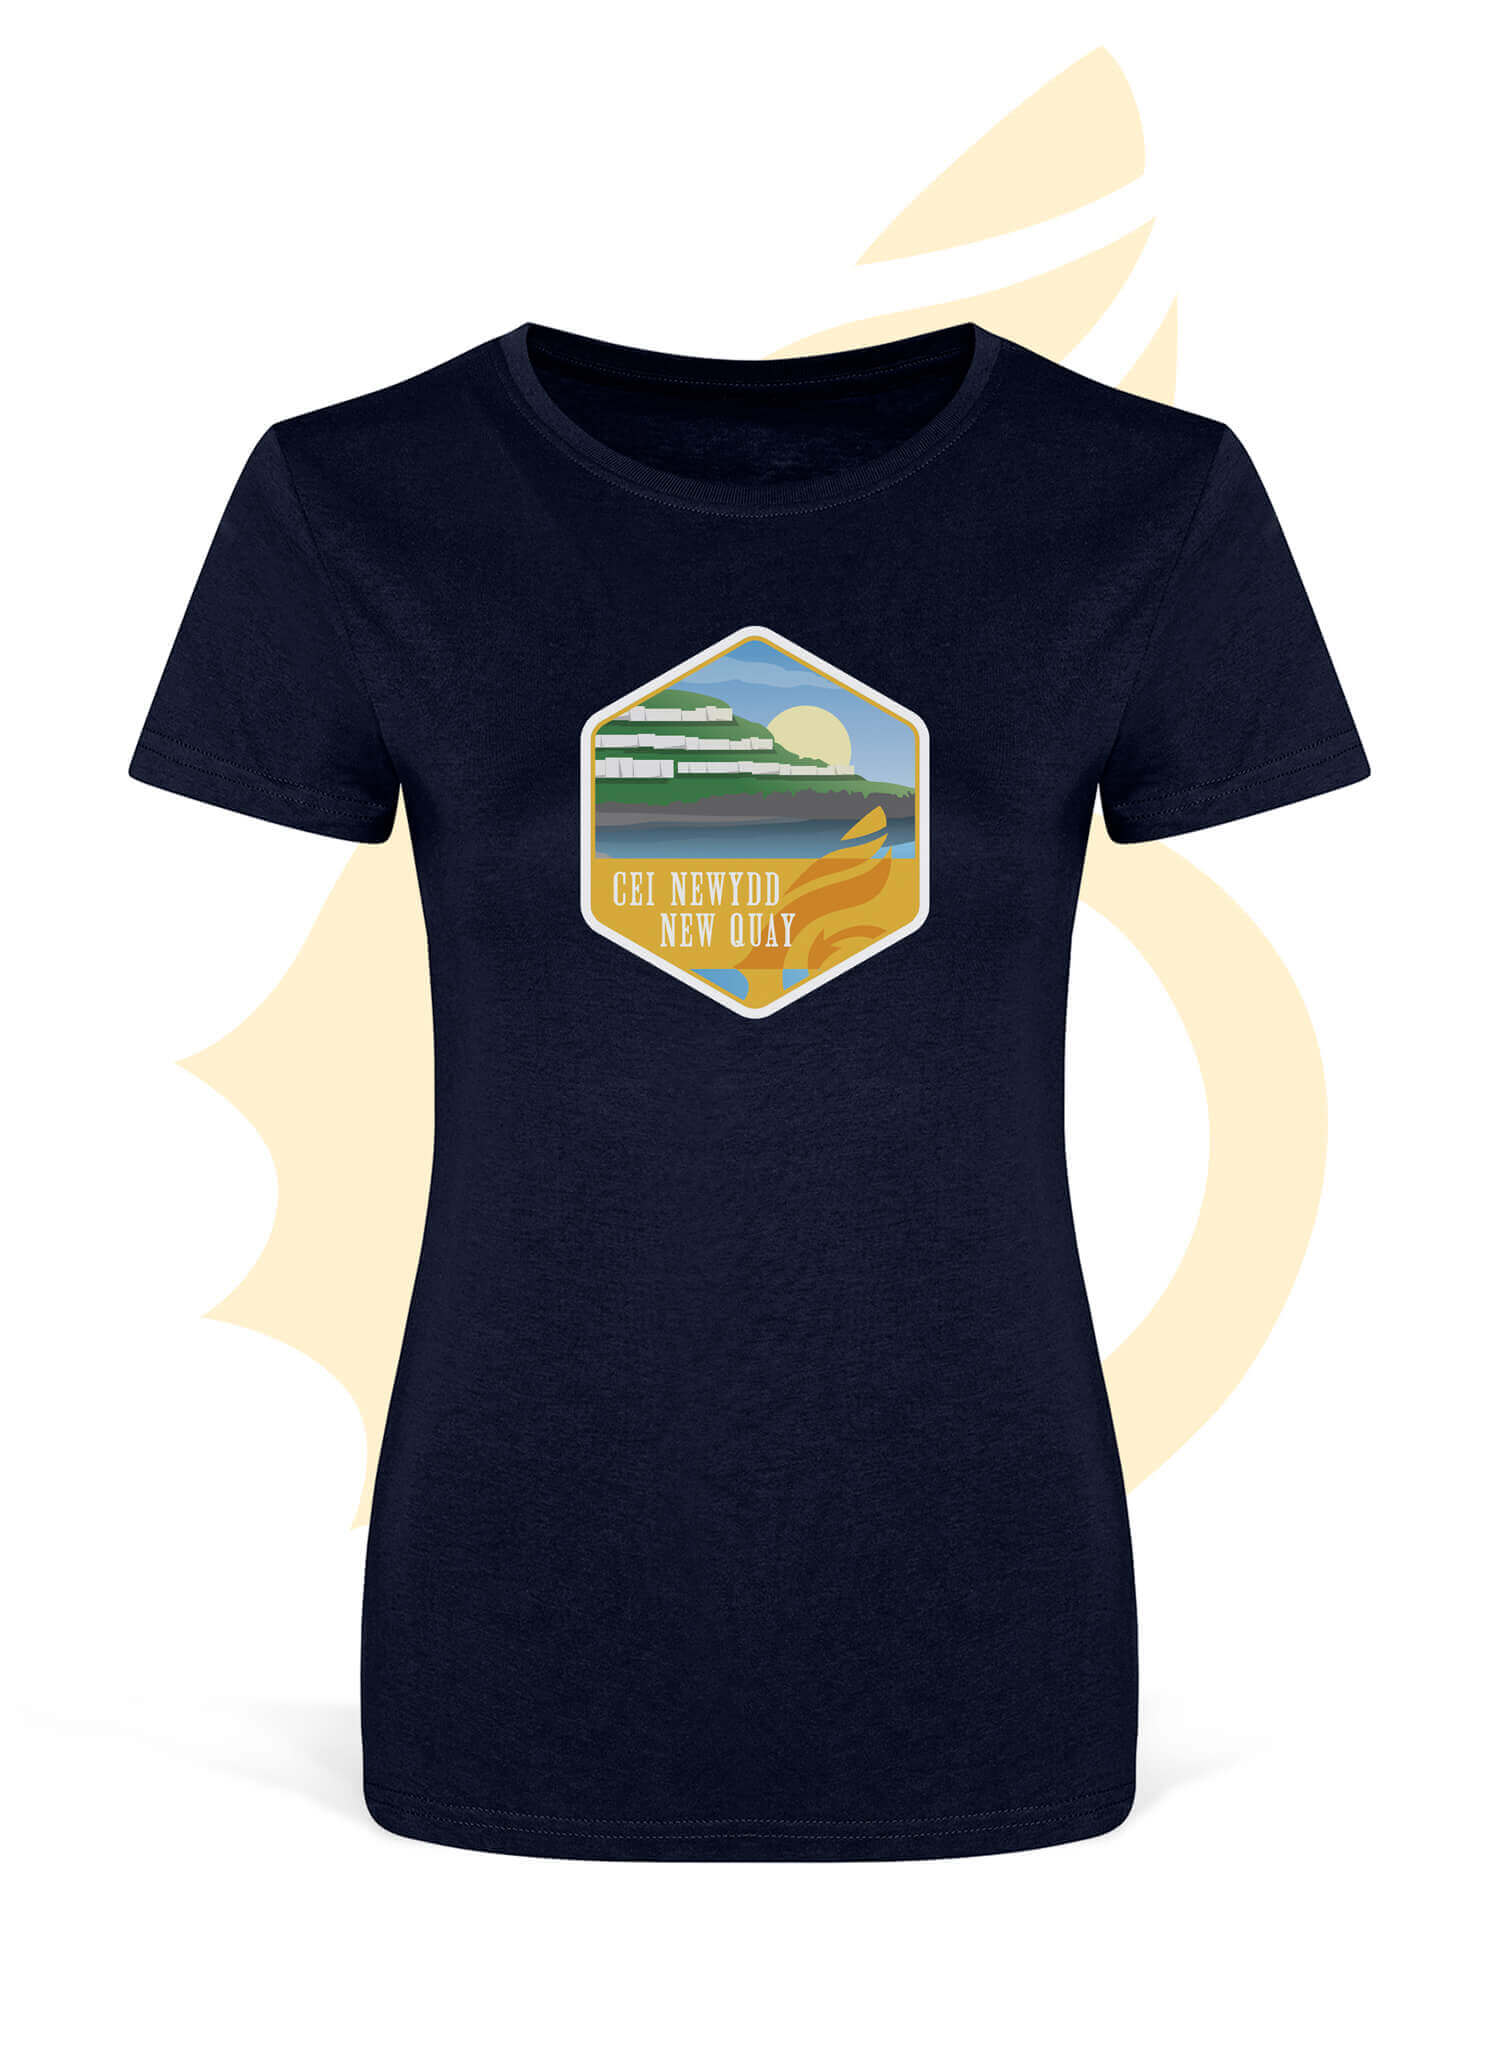 Wales Coast Path womens fitted t-shirt with New Quay design